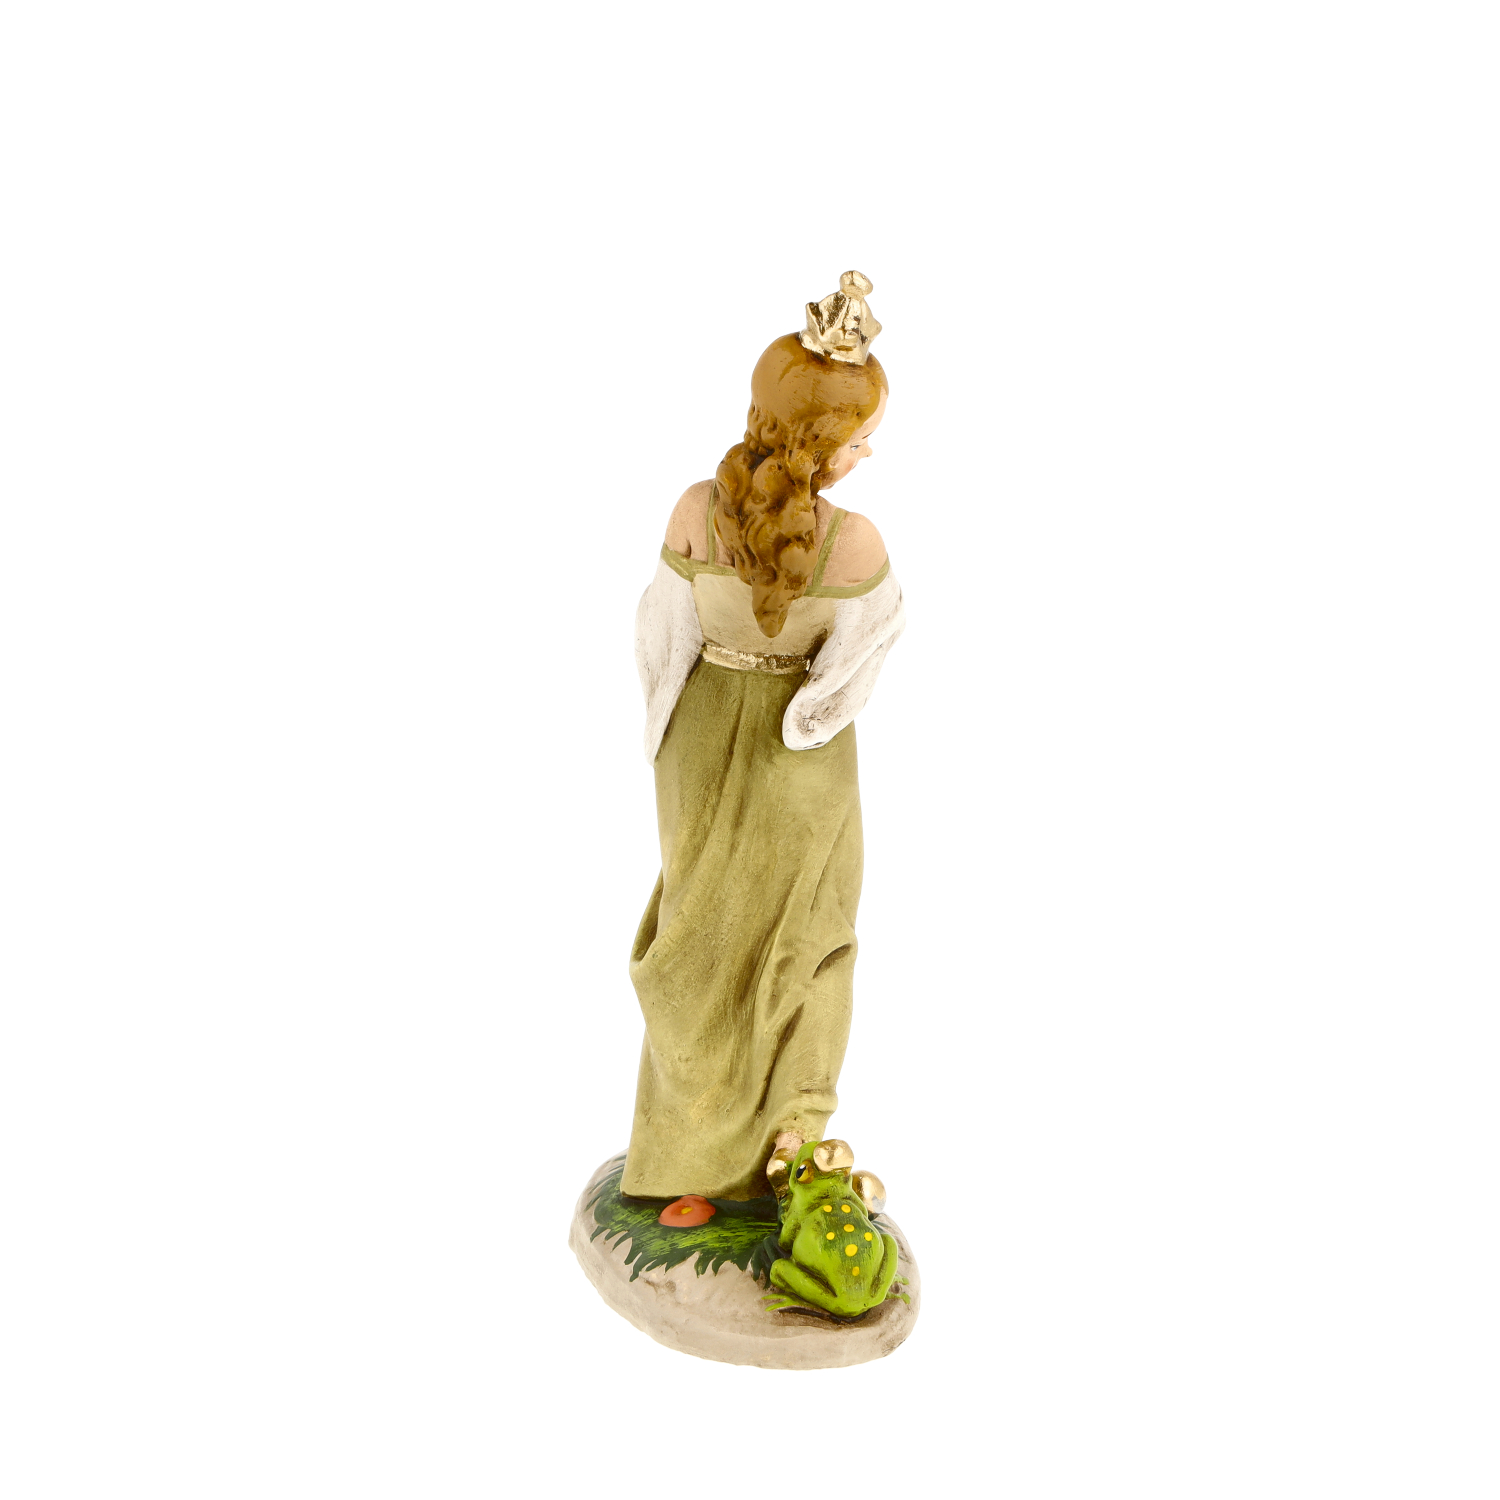 Princess and frog from "Frog King" fairy tale figure, H =  5 3/4 inch